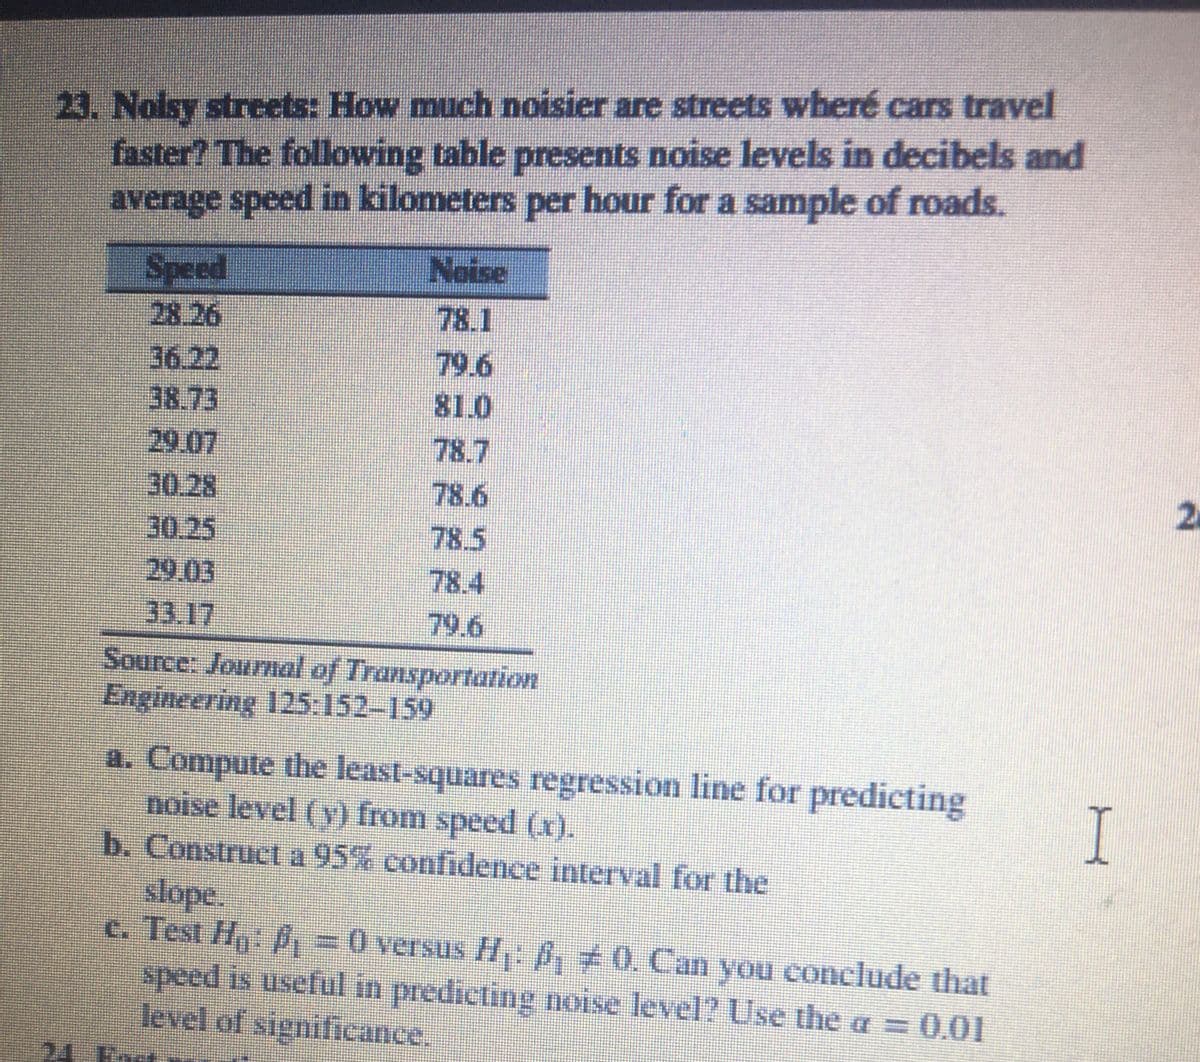 23. Nolsy streets: How much noisier are streets wheré cars travel
faster? The following table presents noise levels in decibels and
average speed in kilometers per hour for a sample of roads.
Speed
Noise
28.26
78.1
36.22
79.6
81.0
38.73
29.07
30.28
:30.25
29.03
33.17
Source: Journal of Transportation
Engineering 125:152-159
78.7
78.6
2.
78.5
78.4
79.6
a. Compute the least-squares regression line for predicting
noise level (v) from speed (x).
b. Construct a 95% confidence interval for the
slope.
c. Test H P, =0 versus H: B, 0. Can you conclude that
speed is useful in predicting noise level? Use the a = 0.01
level of significance.
24 ko.
